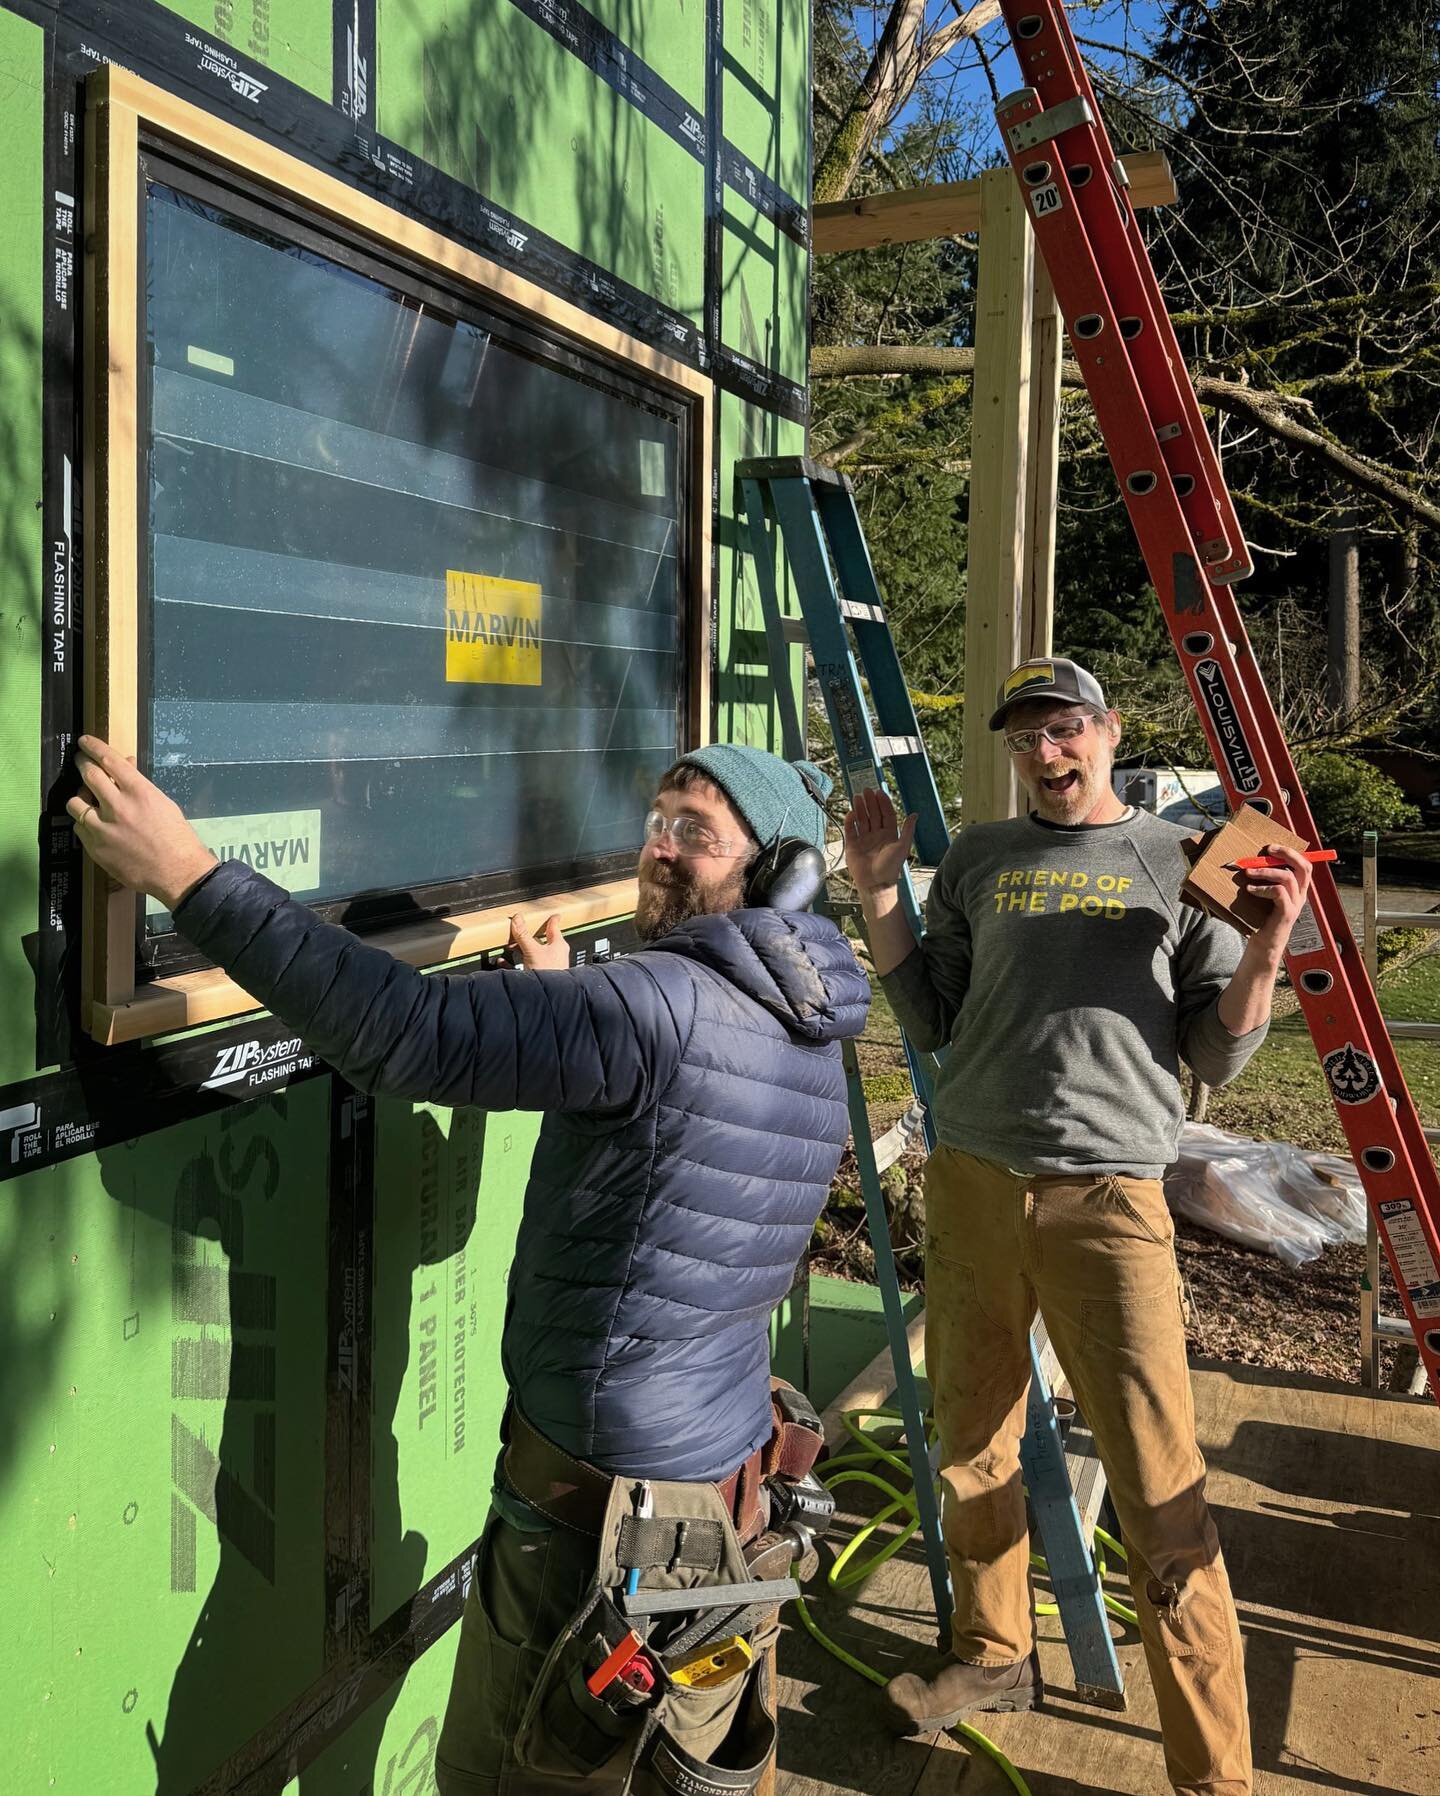 We install a Coravent rainscreen behind our pre-stained, tongue-and-groove cedar siding. This assembly works well on top of the Zip System sheathing. Window trim is pre-assembled before installation.
.
.
#treehouse #woodwork #carpentry #rainscreen #h